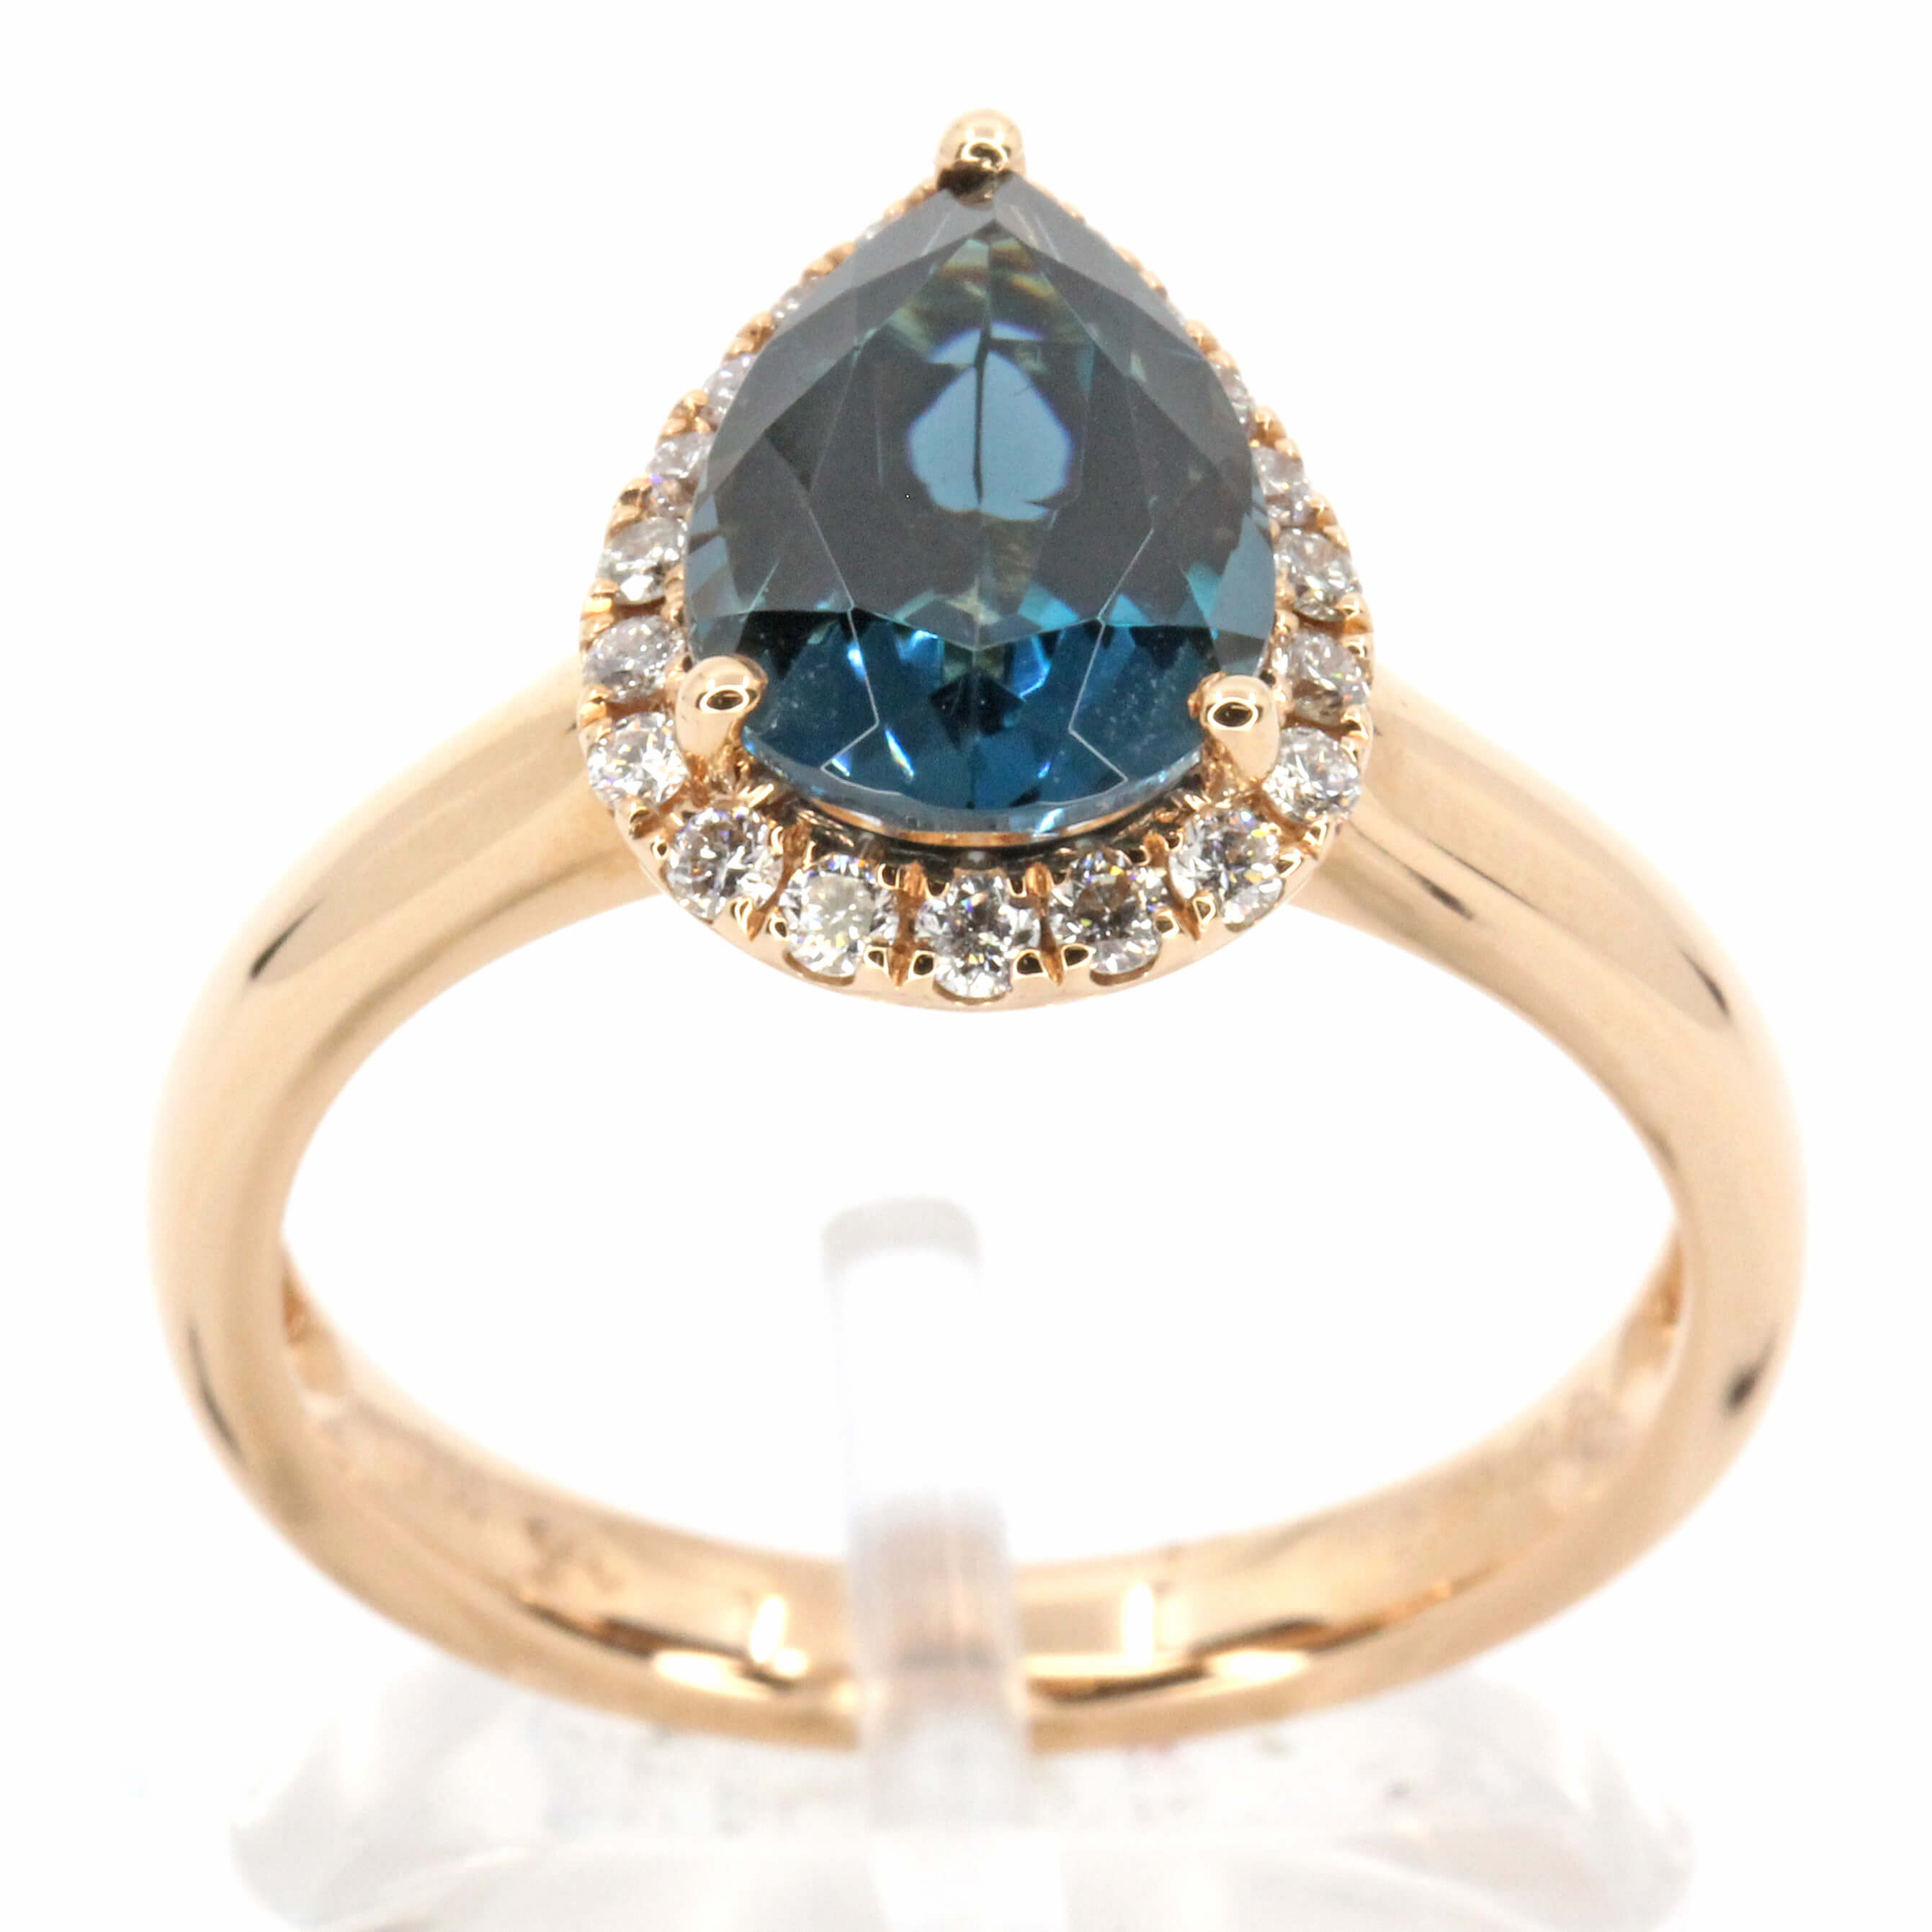 Pear Cut Lodon Blue Topaz Ring with Halo of Diamonds Set